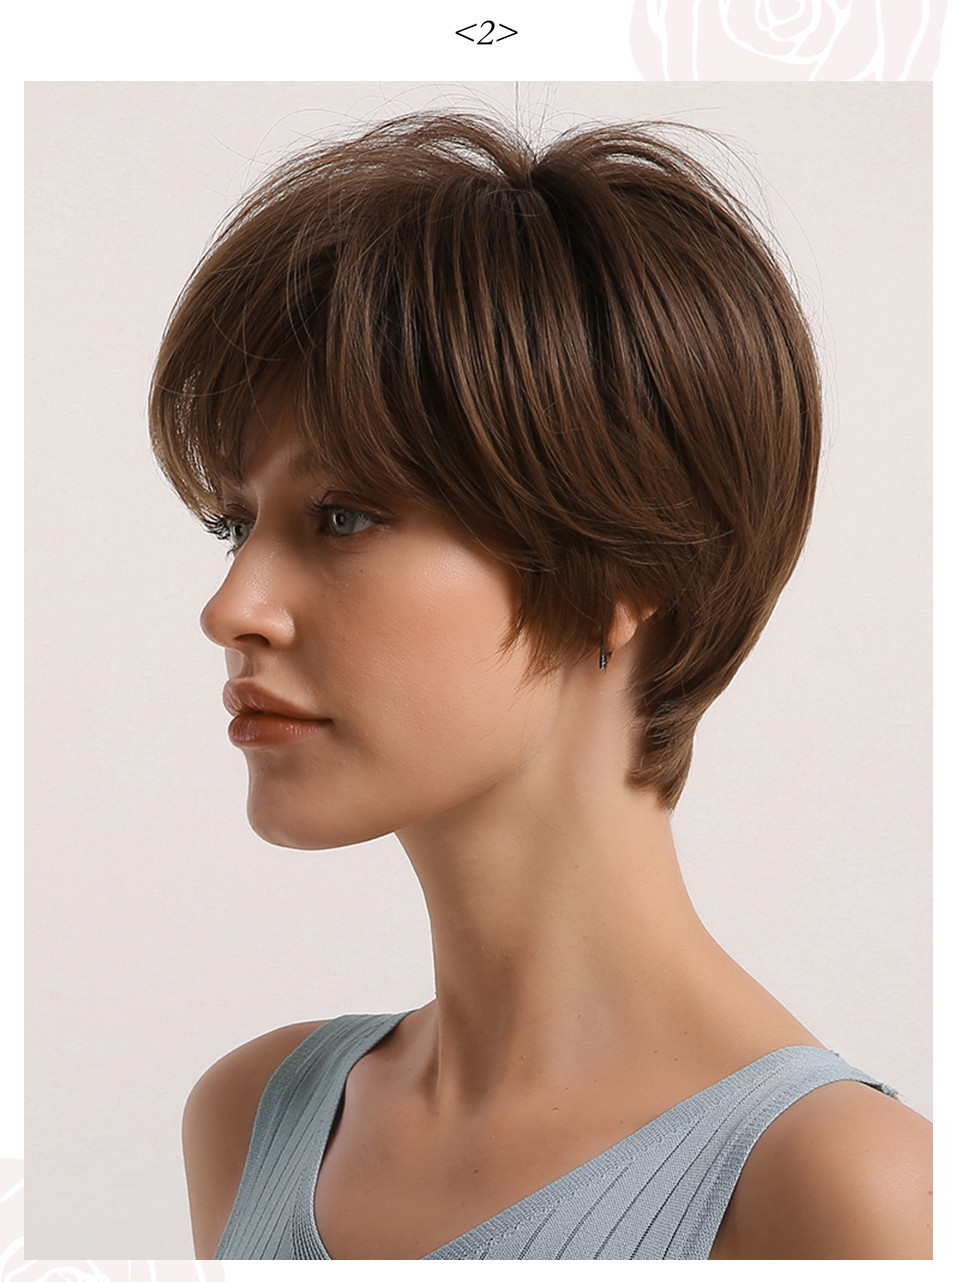 Boy Cut Hairstyle Short Synthetic Hair Natural Straight Women Wig 10 Inches